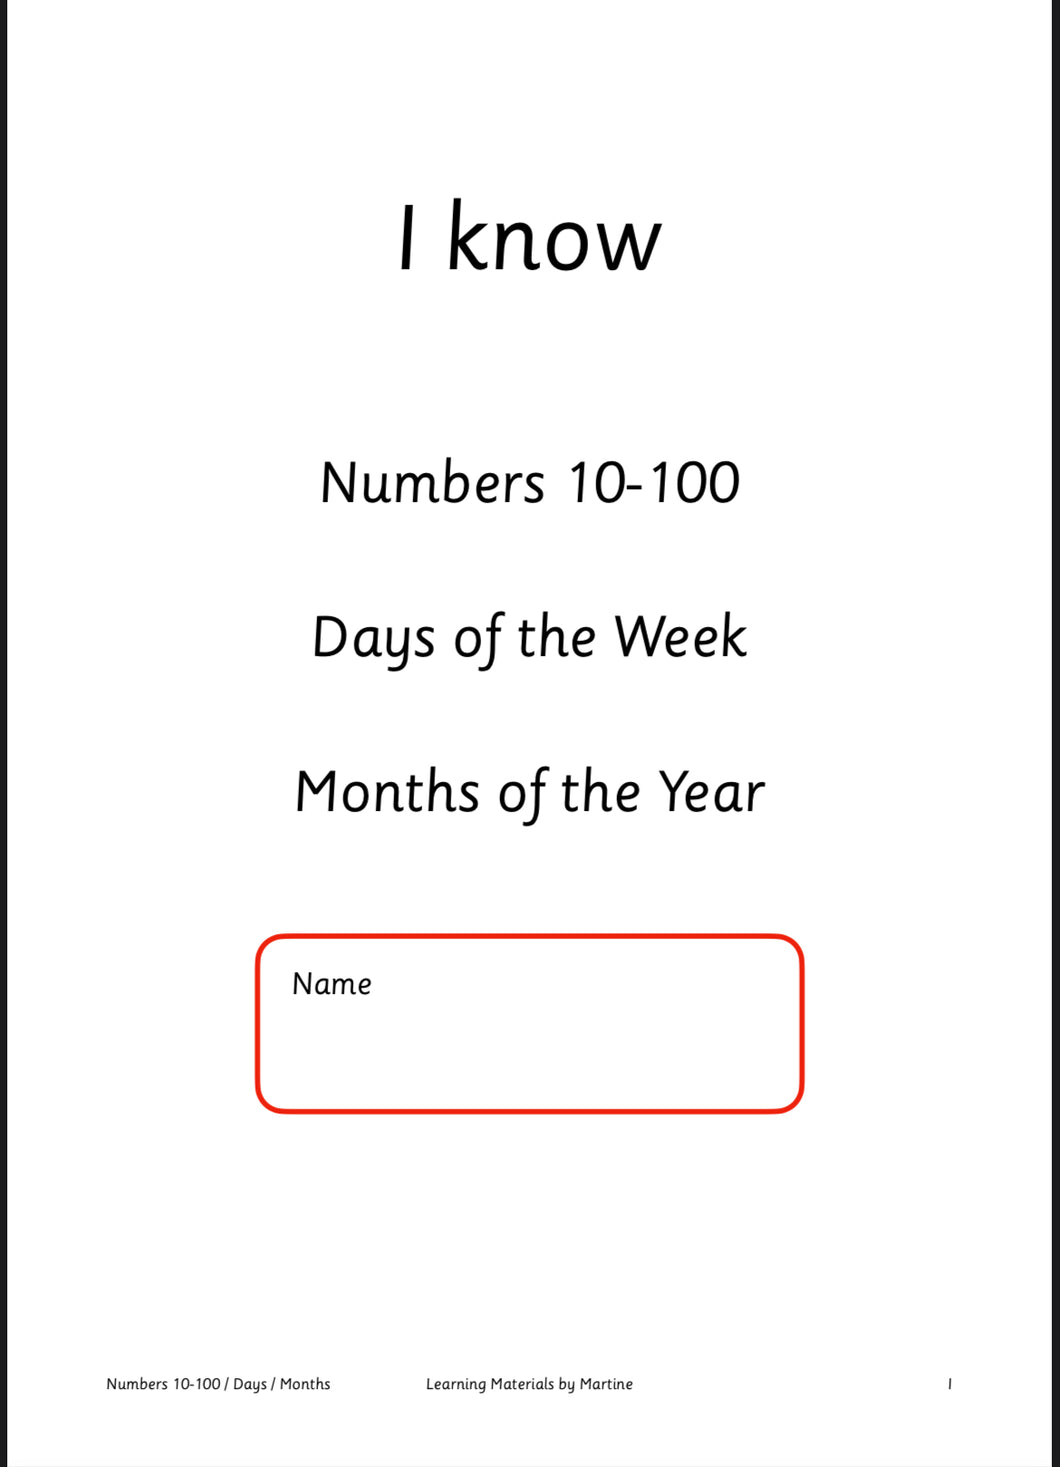 I know numbers 10-100 - days of the week - months of the year